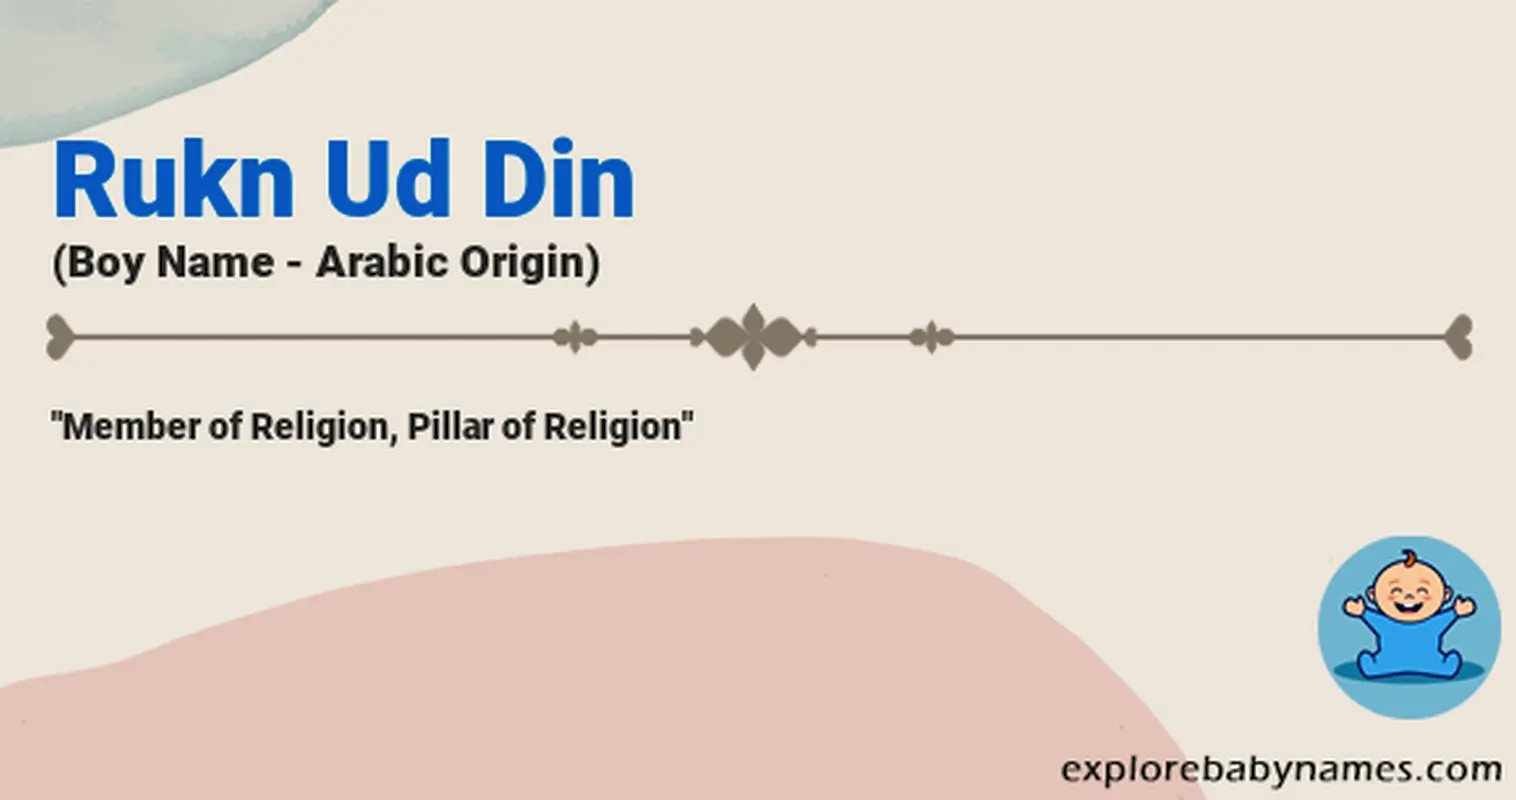 Meaning of Rukn Ud Din